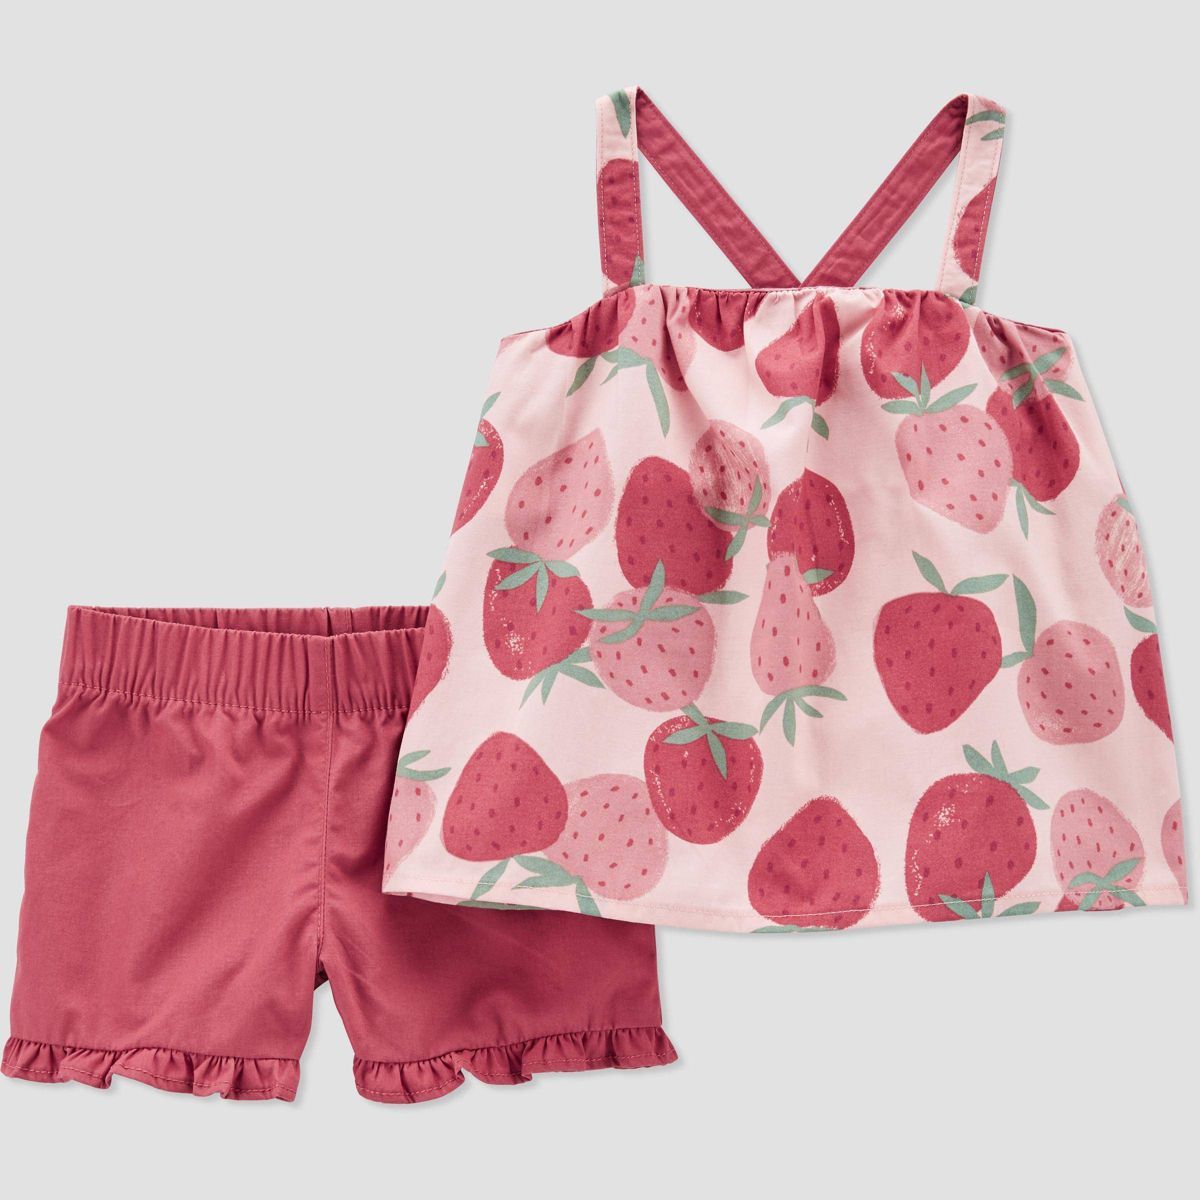 Carter's Just One You®️ Baby Girls' Strawberry Top & Bottom Set - Pink | Target